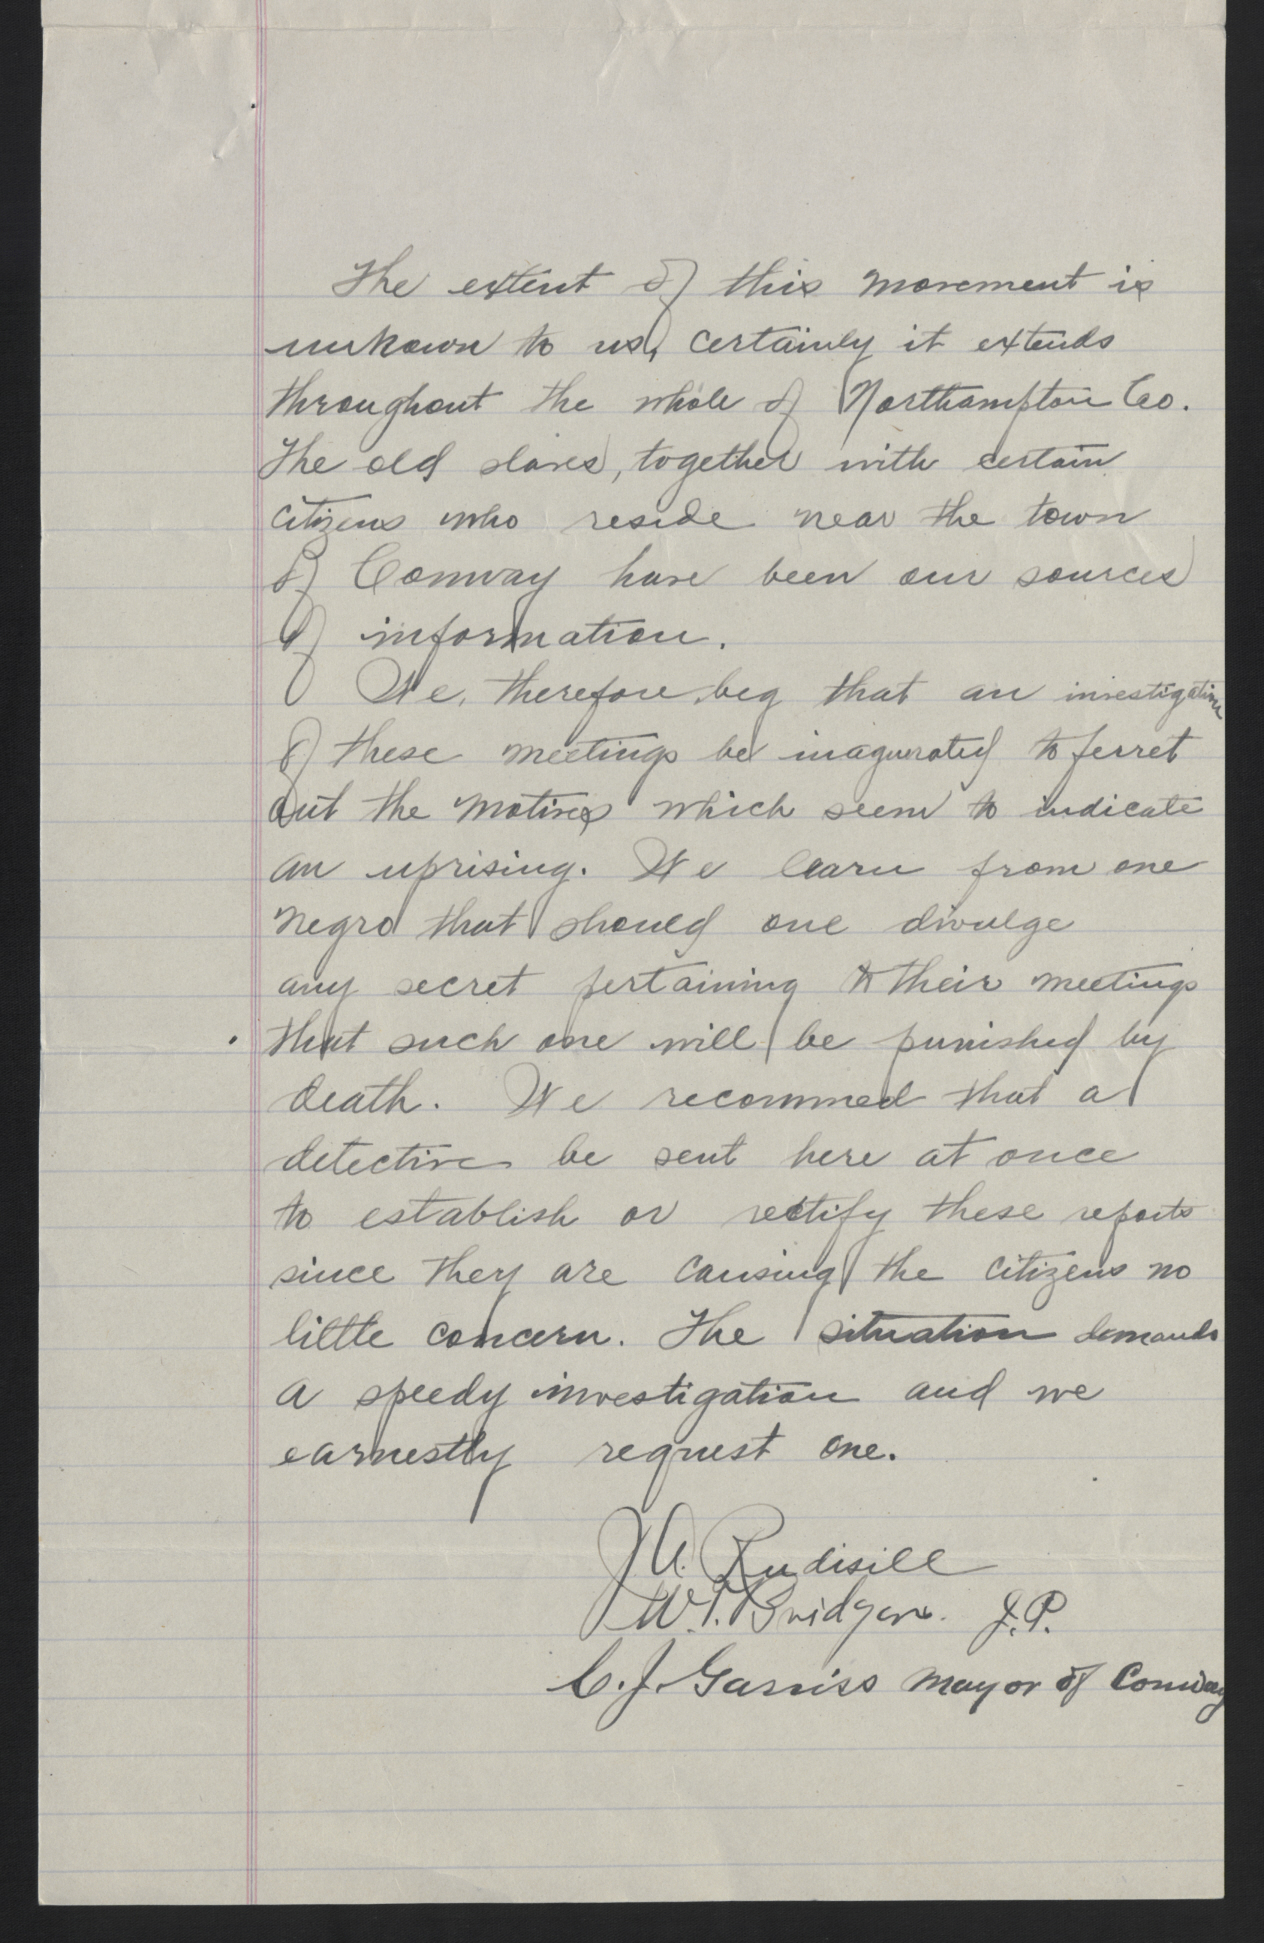 Letter from Jacob A. Rudisill, William T. Bridgers, and Charles J. Garriss to Locke Craig, circa September 1913, page 2